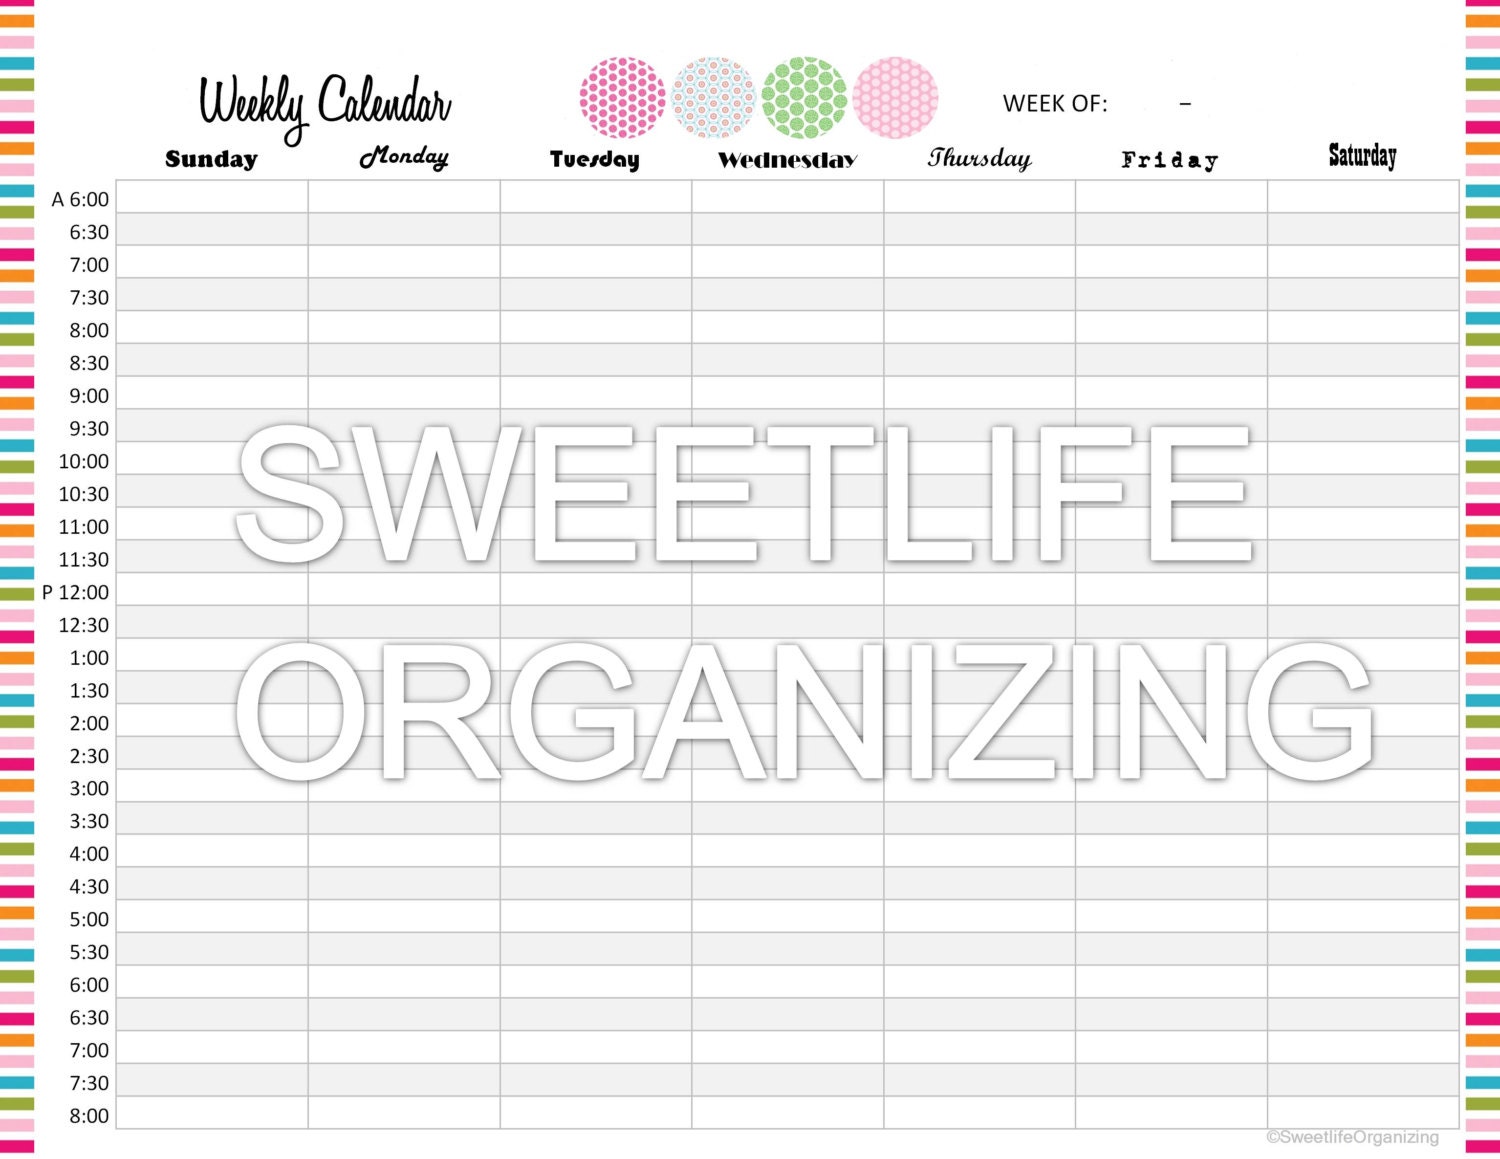 WEEKLY APPOINTMENT CALENDAR Organizing By SweetlifeOrganizing